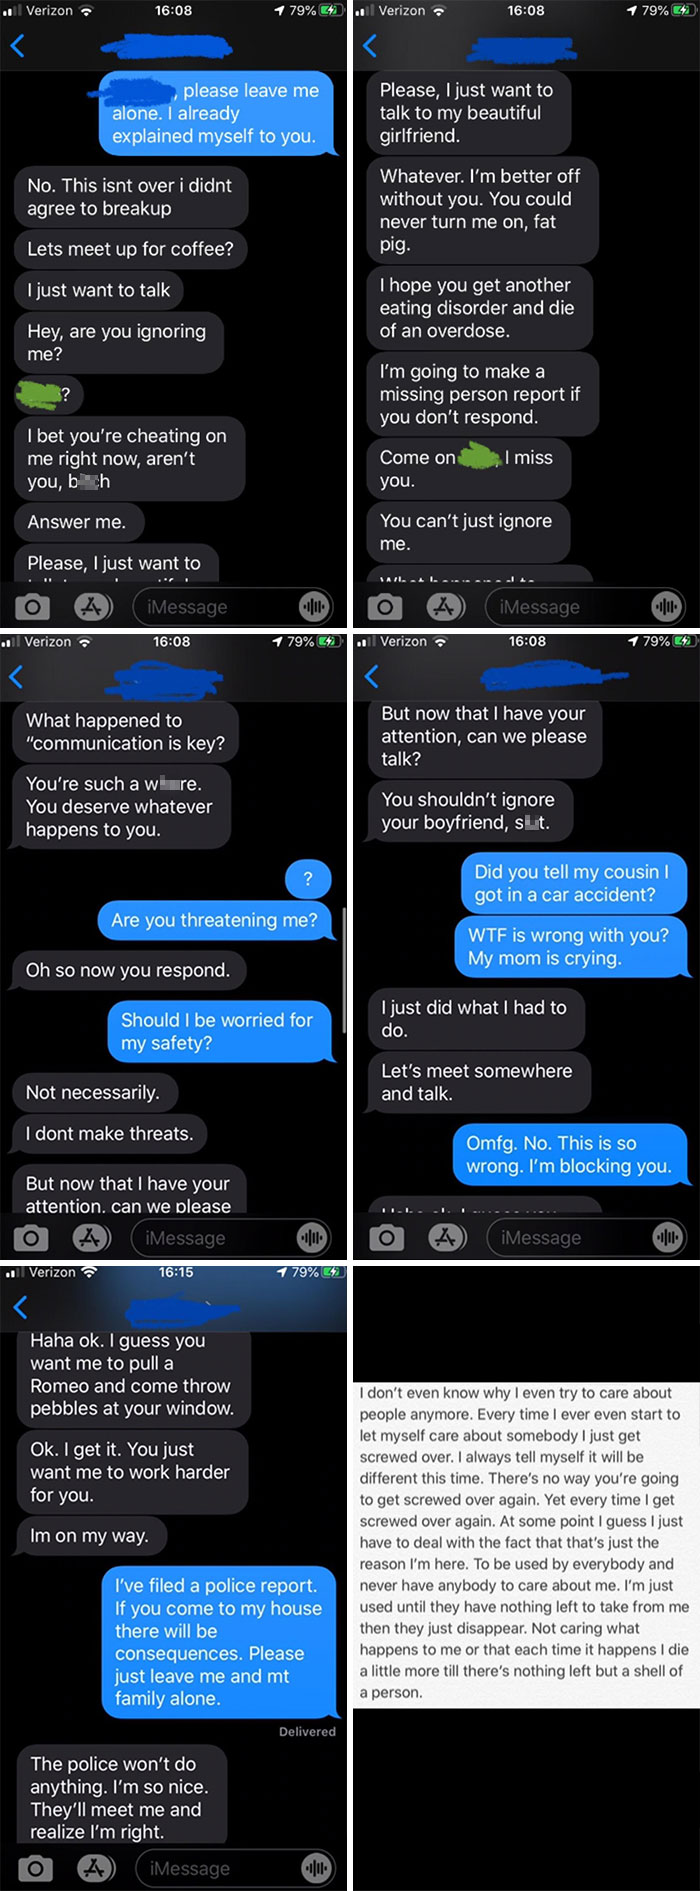 I (19f) Broke Up With My Boyfriend (25m) Of 2 Months Only To Find Out He Was A “Nice Guy.” Bullet Dodged. The Last Bit Of Our Text Conversation And A Post He Made On Instagram A Couple Days Later